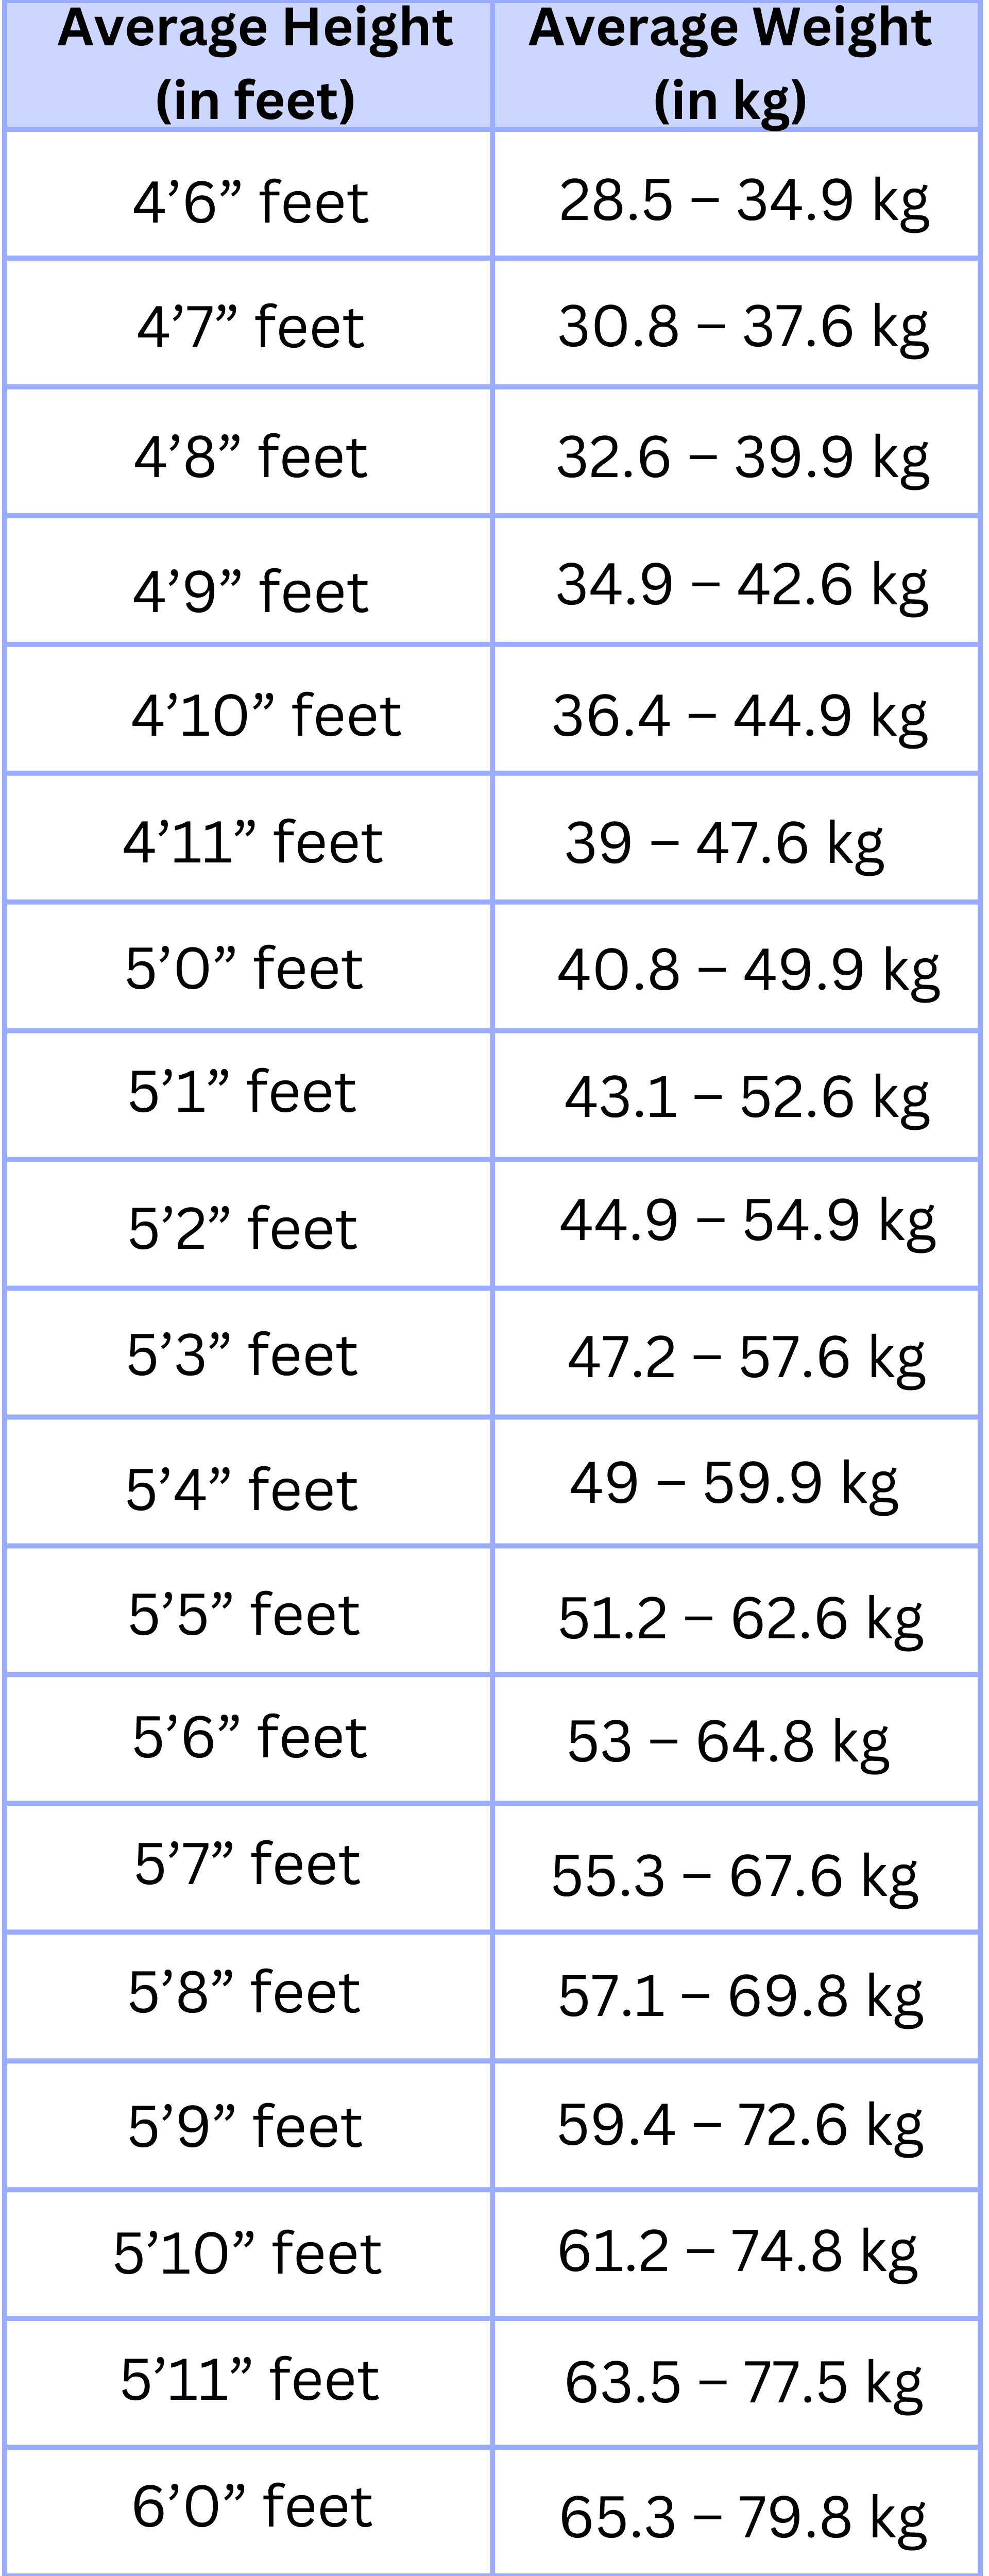 Height Weight Chart - Ideal Weight according to Height